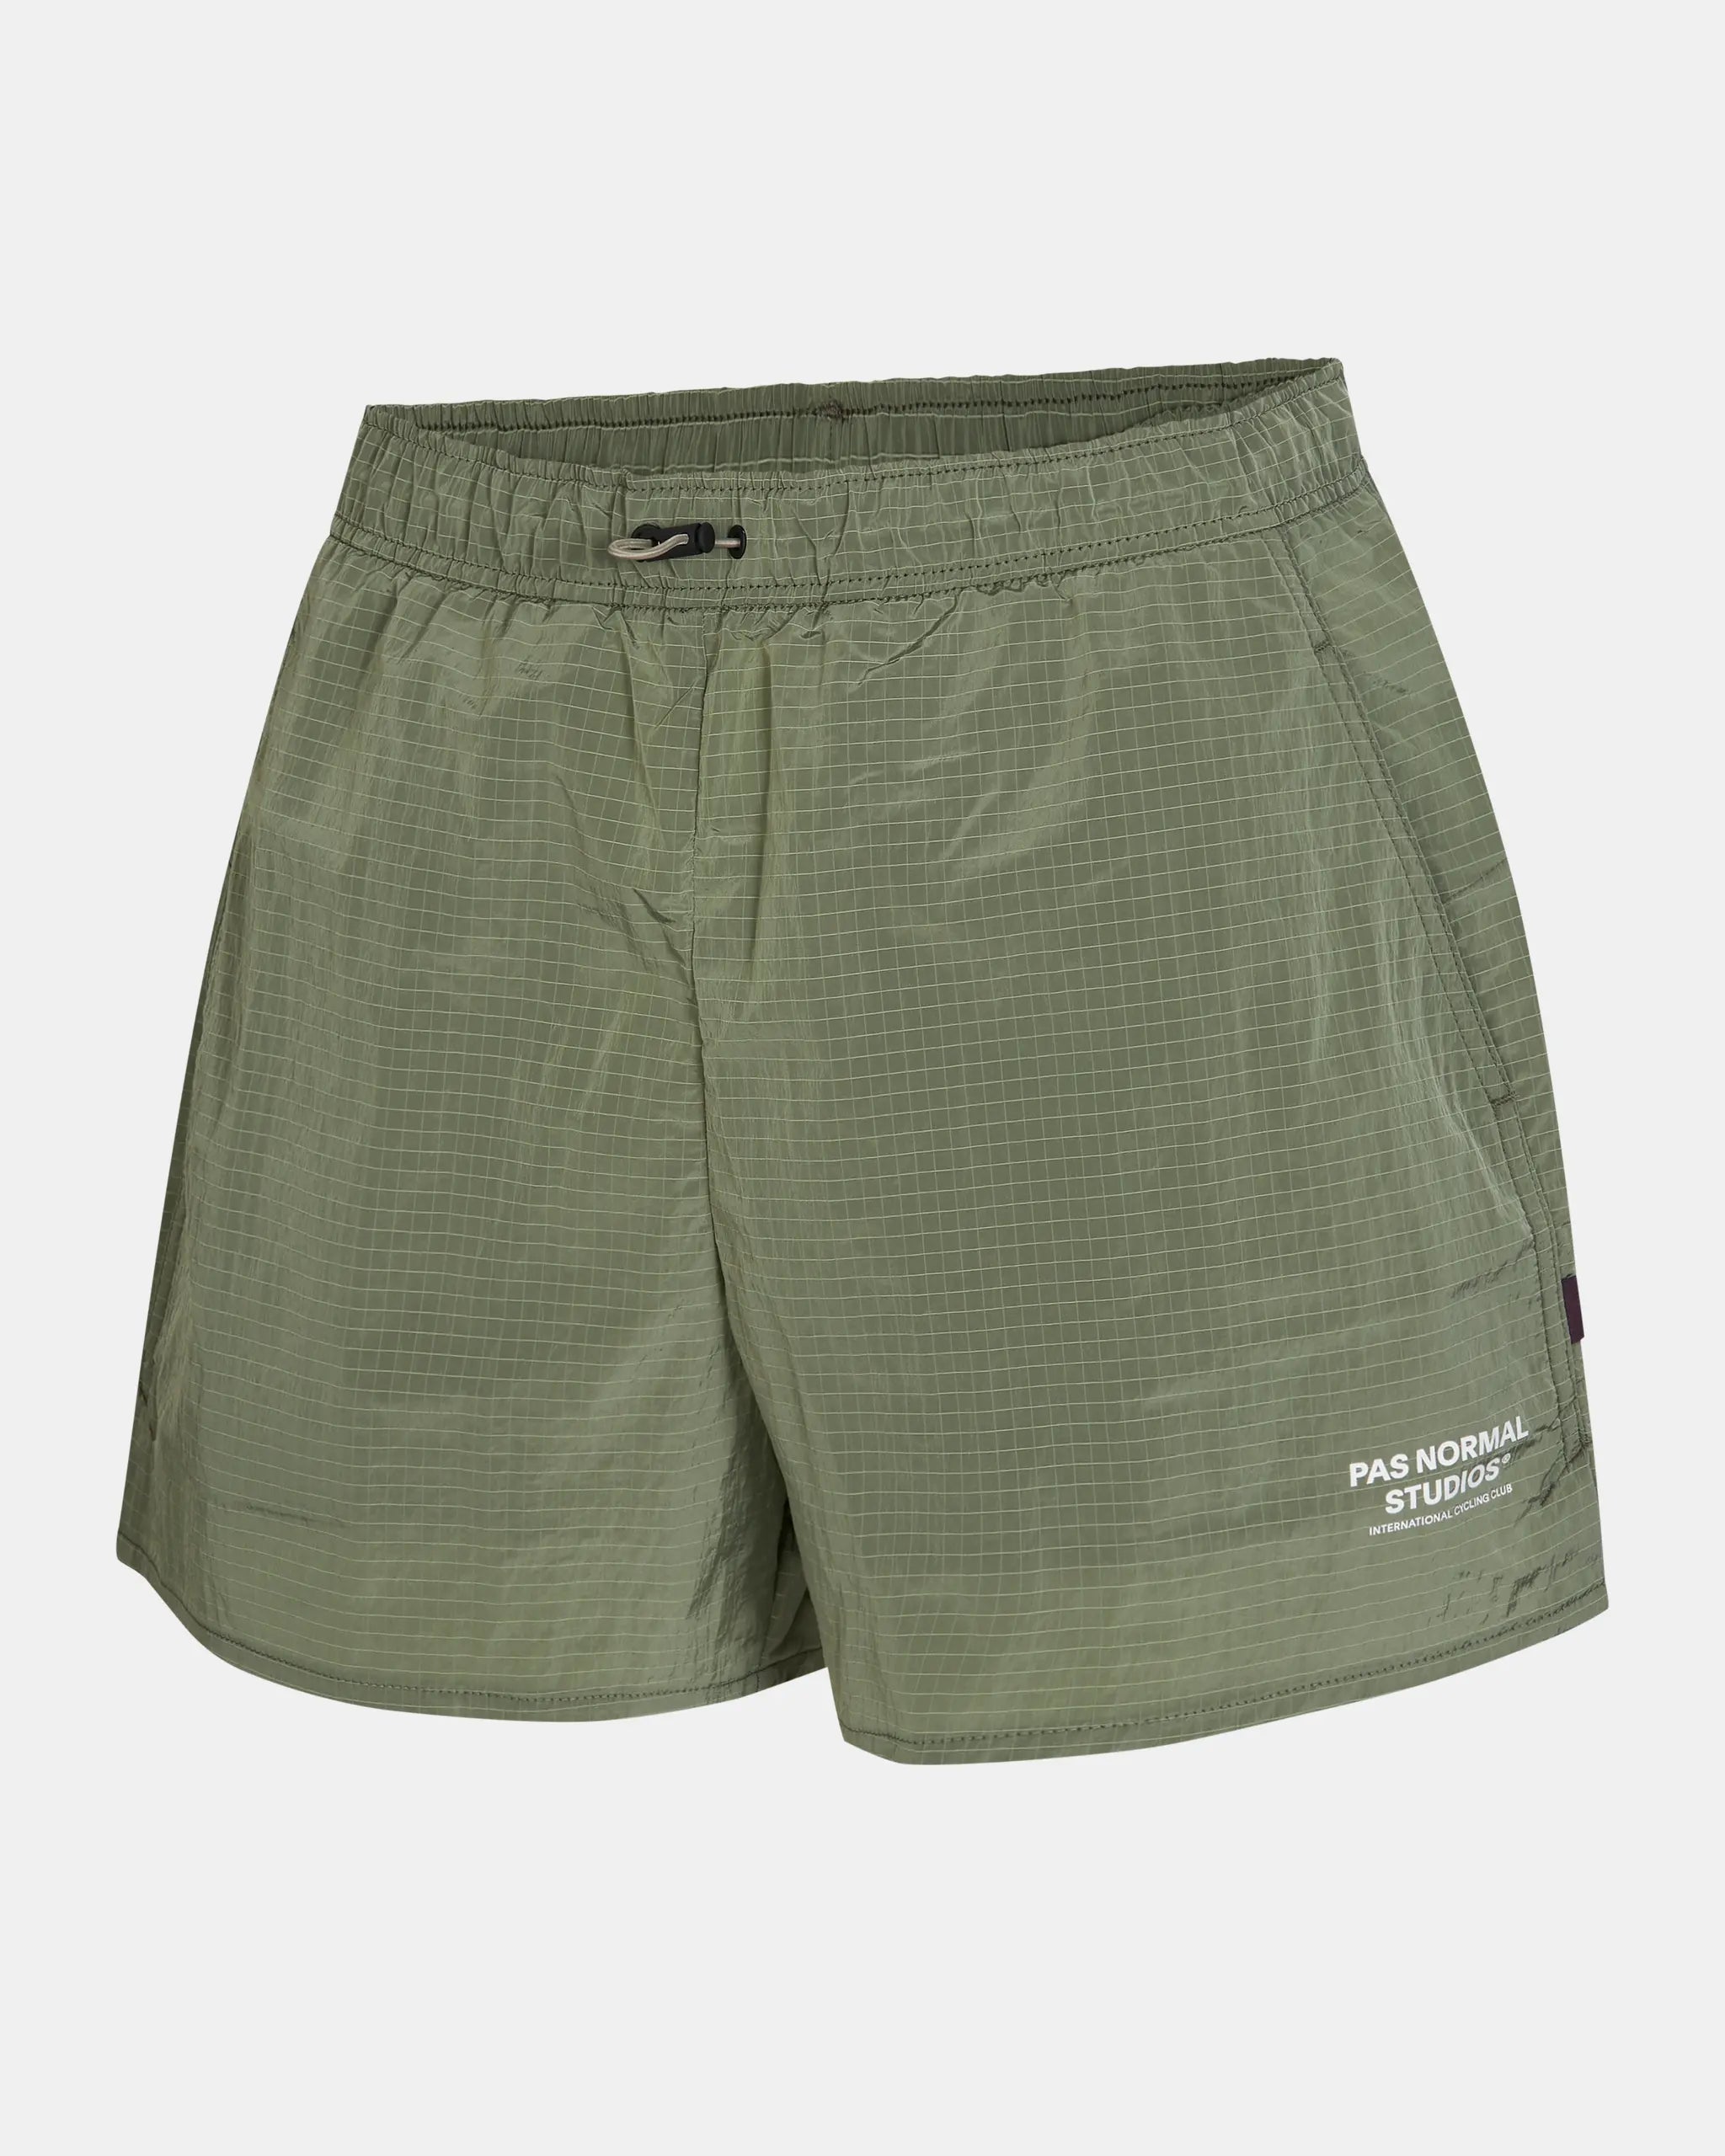 Women's Off-Race Ripstop Shorts - Army Green